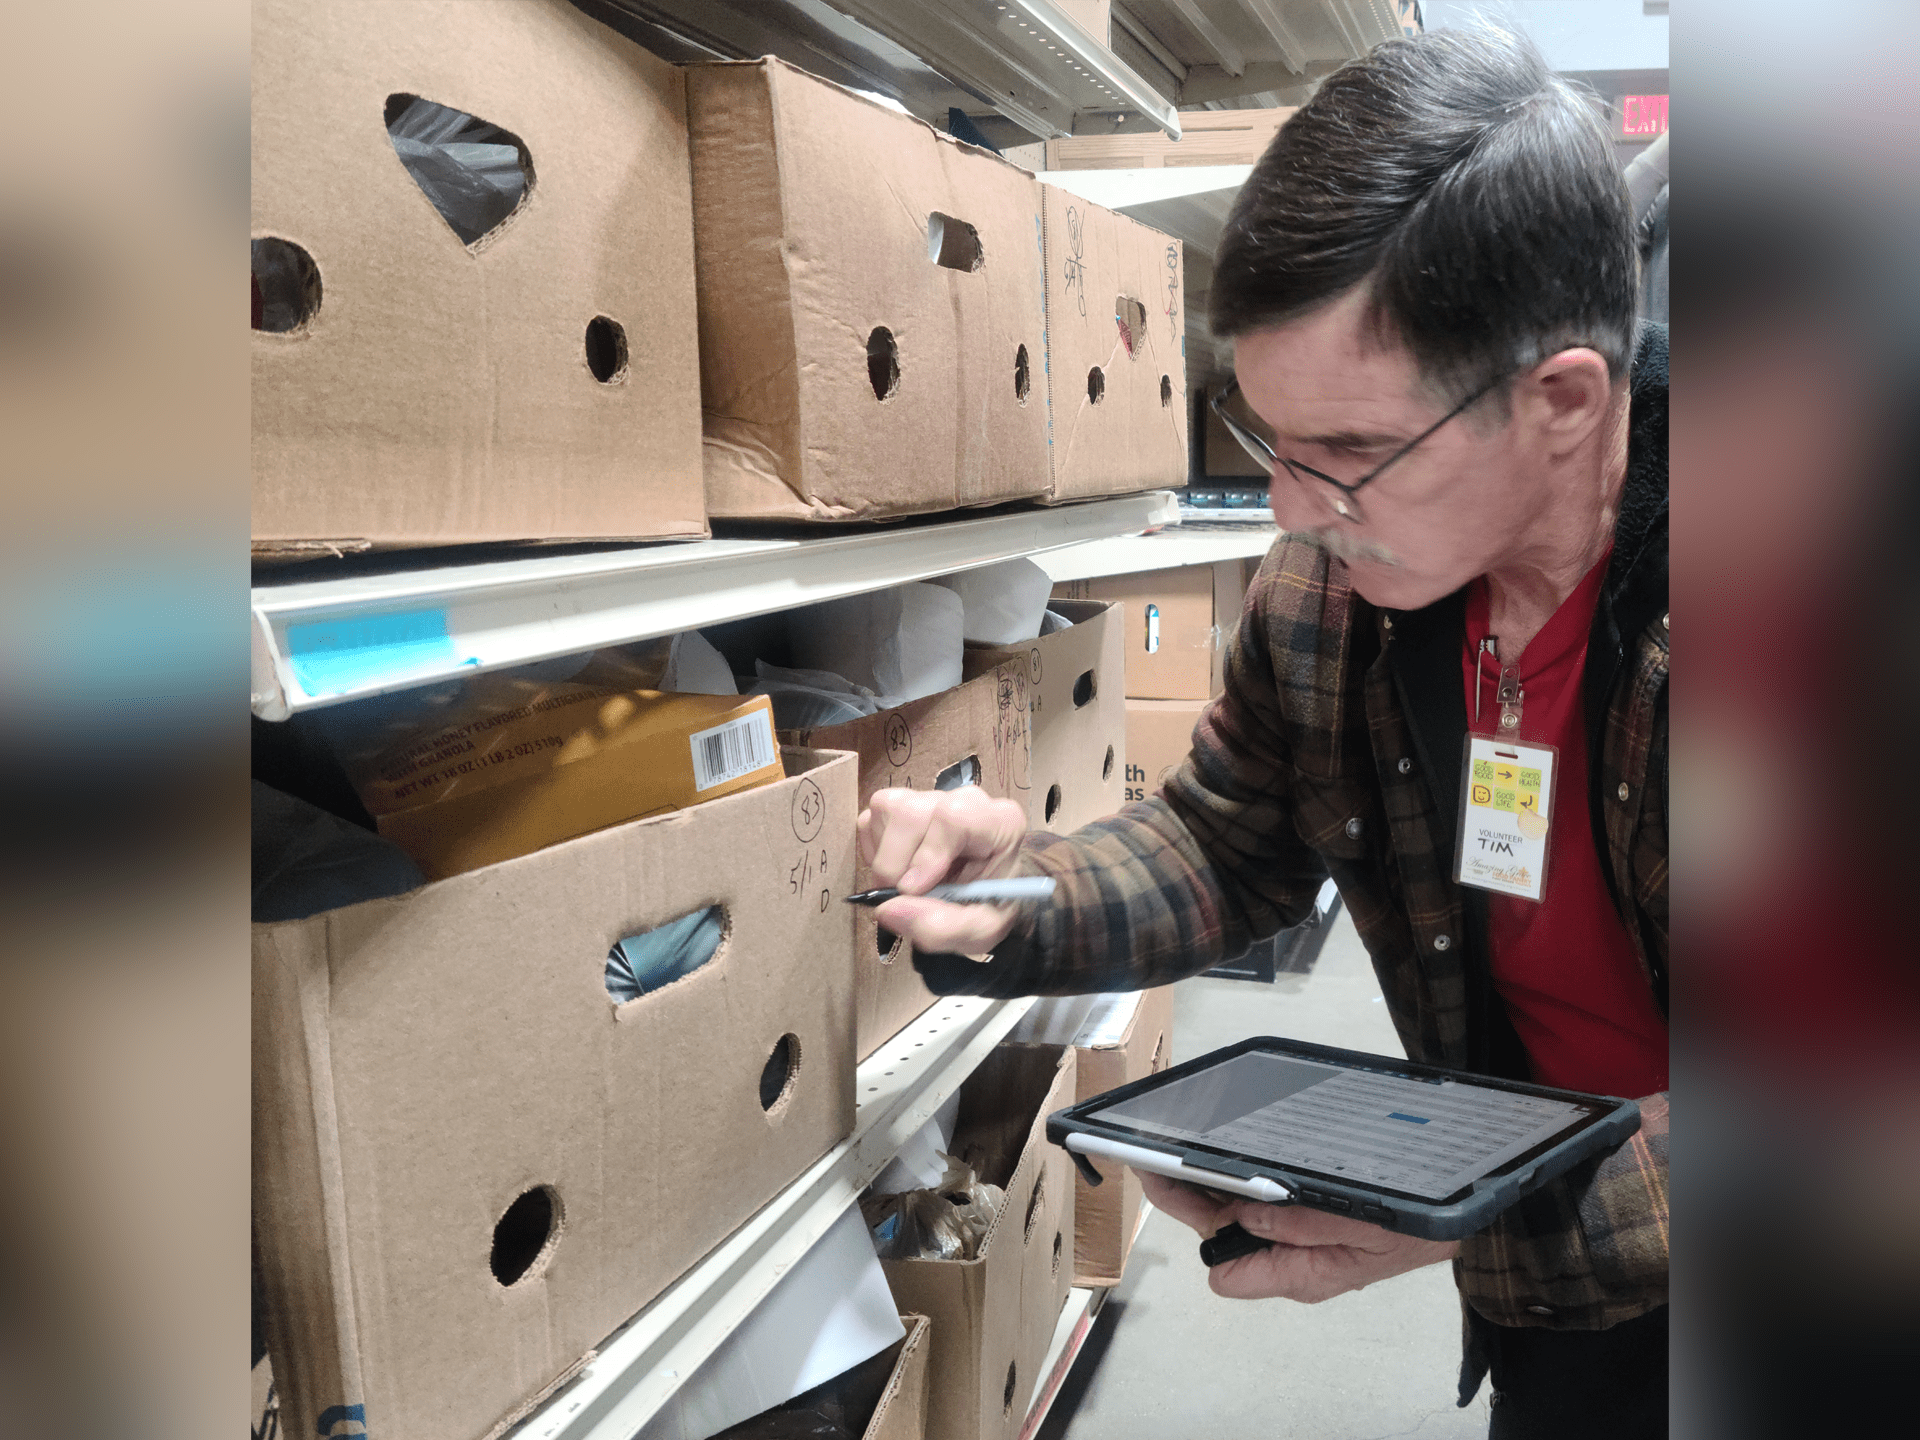 Tim uses technology at Amazing Grace Food Pantry